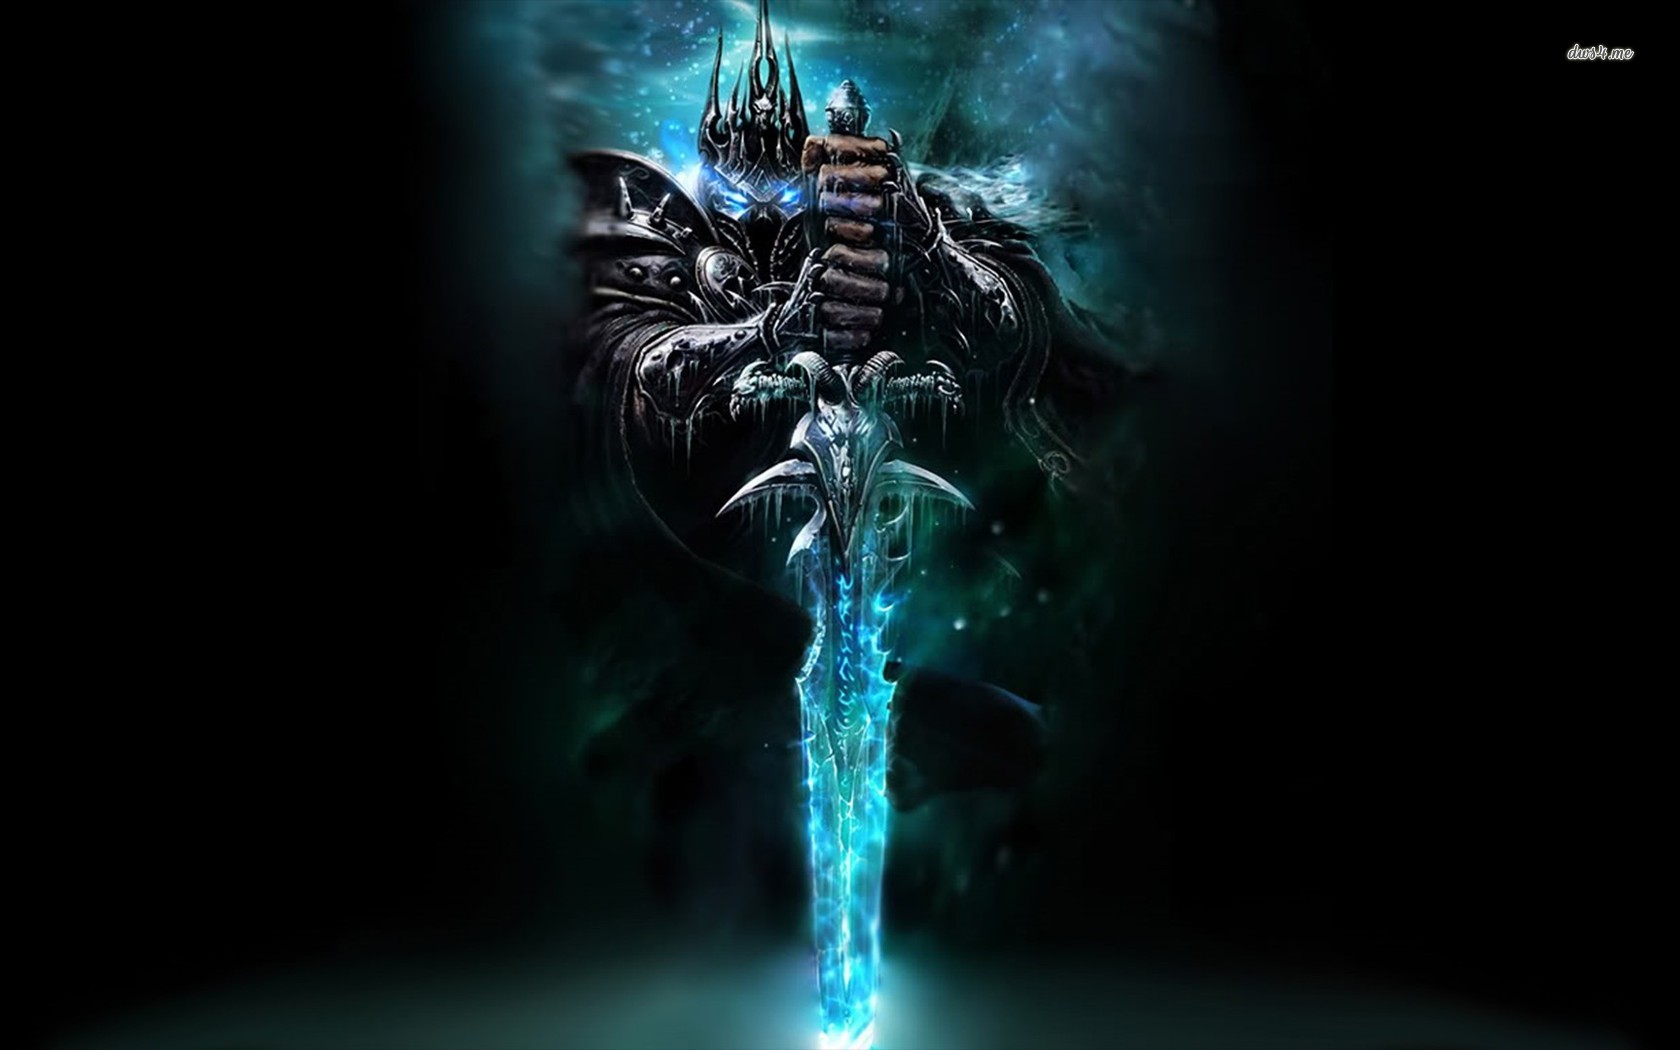 World of Warcraft Wrath of the Lich King Classic Game Wallpaper 4K HD PC  6261j